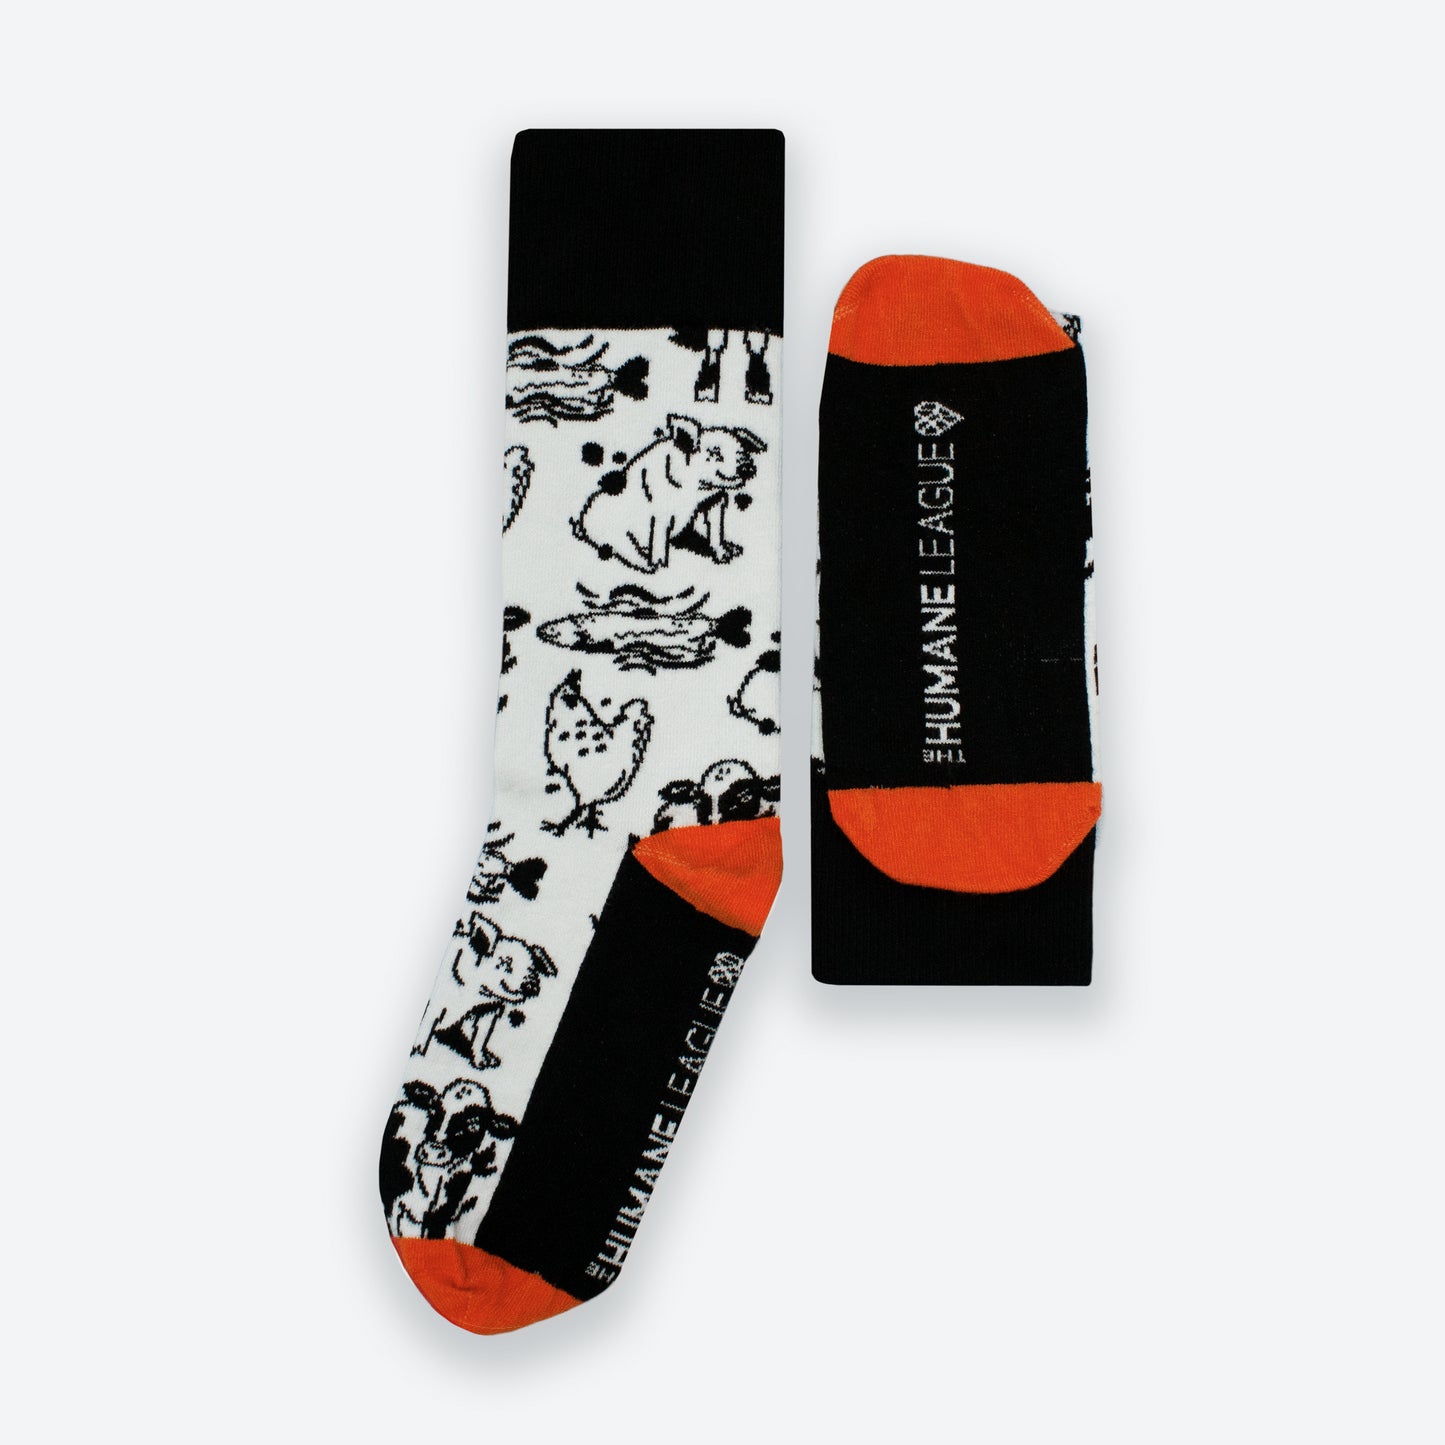 Pair of socks featuring black and white illustrations of cows, pigs, fish, and chickens. The toe and heel are bright red. The top and bottom are solid black. The Humane League logo is on the bottom of the socks.